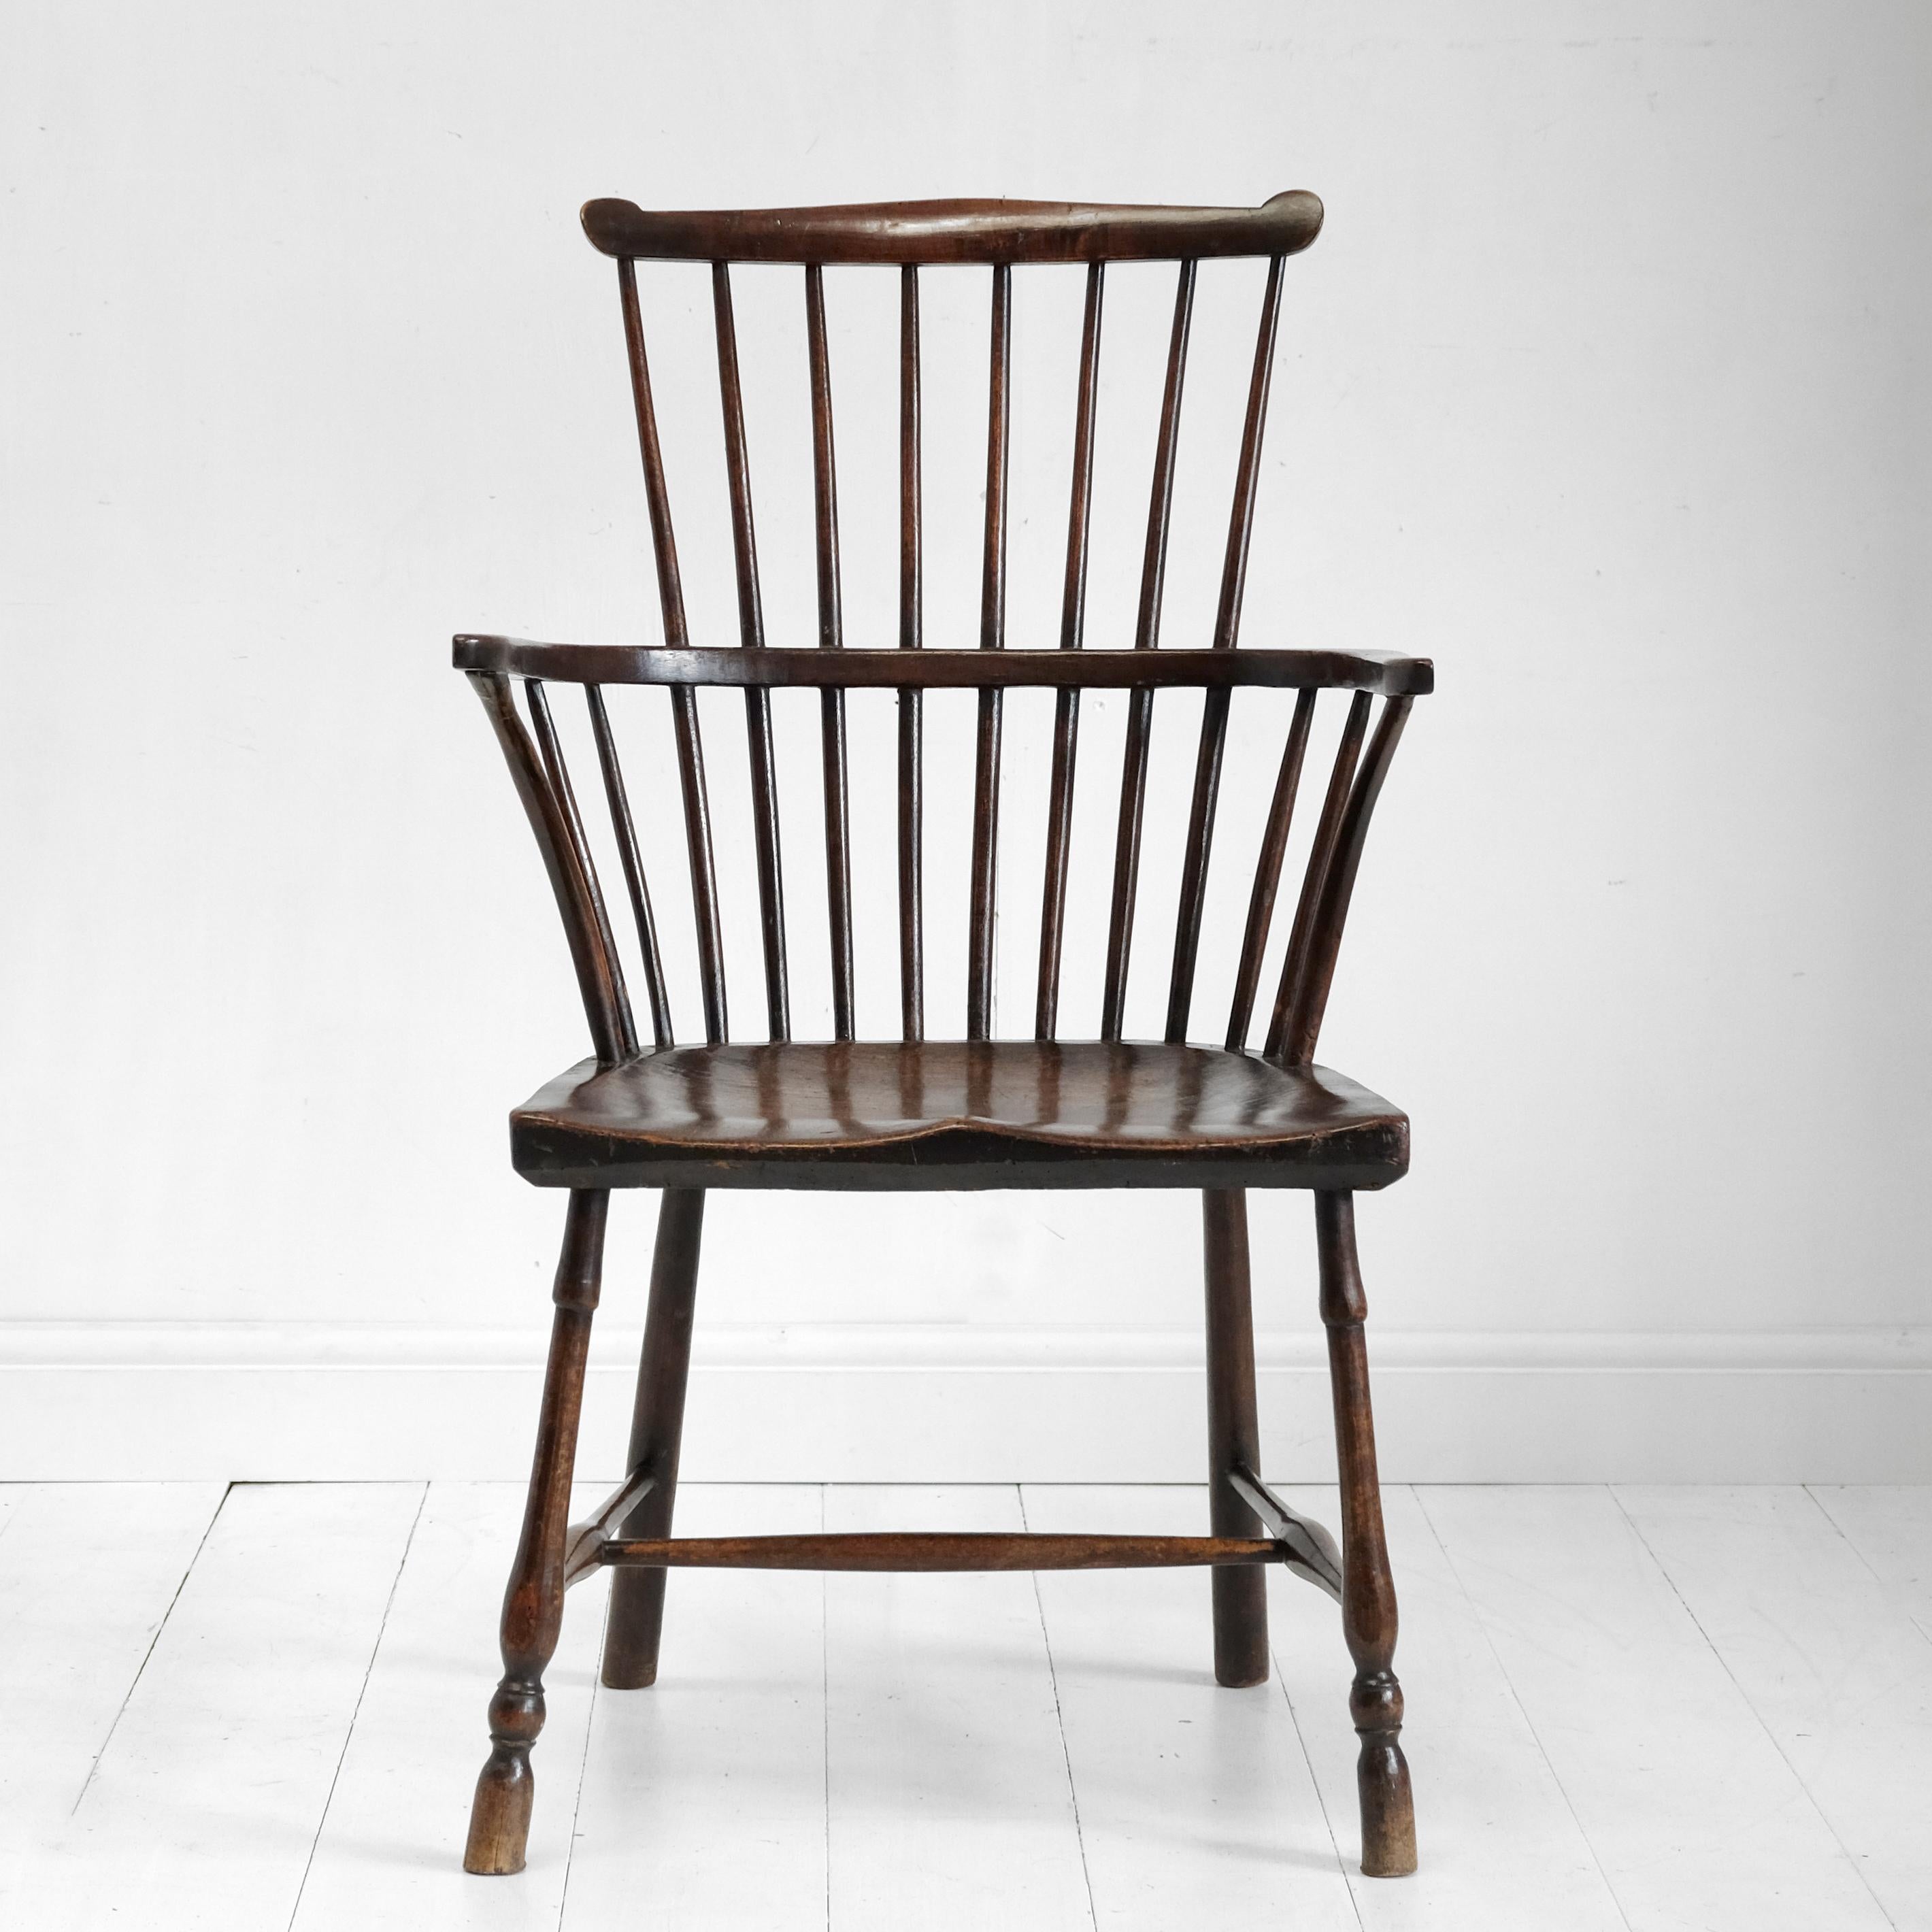 A comb back Windsor chair in elm and beech. Egg and reel turned front legs with plain tapered rear legs, united by a turned H-stretcher. Nicely shaped elm seat with pleasing color and grain pattern. The arm hoop with bent supports and simple stick